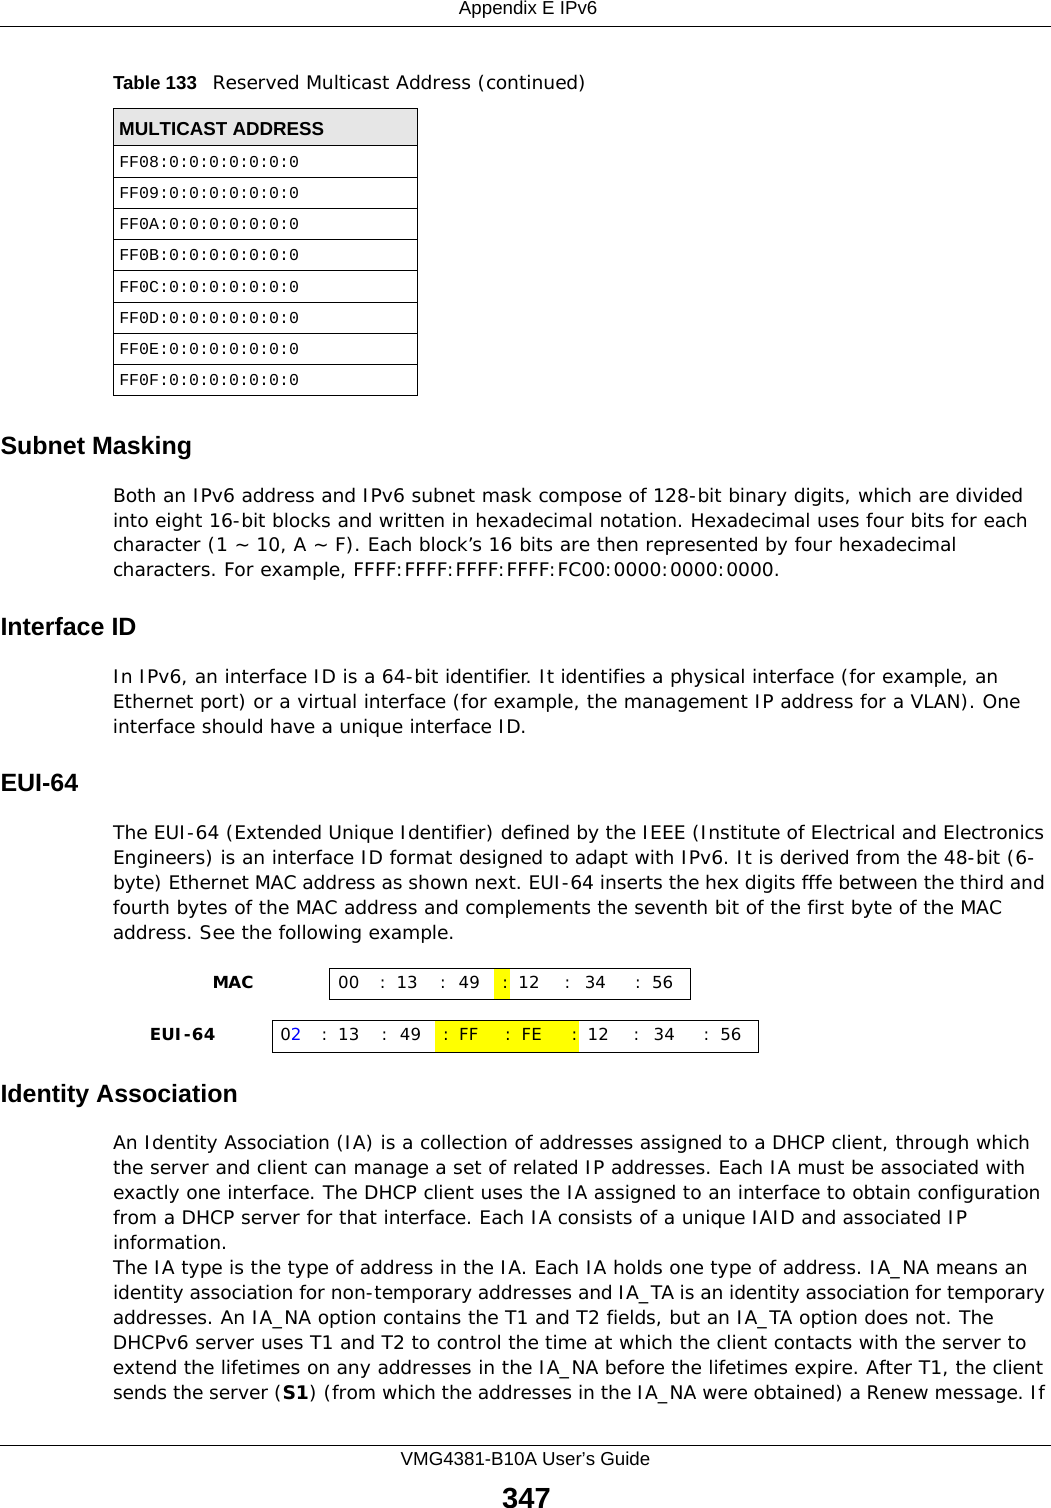  Appendix E IPv6VMG4381-B10A User’s Guide347Subnet MaskingBoth an IPv6 address and IPv6 subnet mask compose of 128-bit binary digits, which are divided into eight 16-bit blocks and written in hexadecimal notation. Hexadecimal uses four bits for each character (1 ~ 10, A ~ F). Each block’s 16 bits are then represented by four hexadecimal characters. For example, FFFF:FFFF:FFFF:FFFF:FC00:0000:0000:0000.Interface IDIn IPv6, an interface ID is a 64-bit identifier. It identifies a physical interface (for example, an Ethernet port) or a virtual interface (for example, the management IP address for a VLAN). One interface should have a unique interface ID.EUI-64The EUI-64 (Extended Unique Identifier) defined by the IEEE (Institute of Electrical and Electronics Engineers) is an interface ID format designed to adapt with IPv6. It is derived from the 48-bit (6-byte) Ethernet MAC address as shown next. EUI-64 inserts the hex digits fffe between the third and fourth bytes of the MAC address and complements the seventh bit of the first byte of the MAC address. See the following example. Identity AssociationAn Identity Association (IA) is a collection of addresses assigned to a DHCP client, through which the server and client can manage a set of related IP addresses. Each IA must be associated with exactly one interface. The DHCP client uses the IA assigned to an interface to obtain configuration from a DHCP server for that interface. Each IA consists of a unique IAID and associated IP information.The IA type is the type of address in the IA. Each IA holds one type of address. IA_NA means an identity association for non-temporary addresses and IA_TA is an identity association for temporary addresses. An IA_NA option contains the T1 and T2 fields, but an IA_TA option does not. The DHCPv6 server uses T1 and T2 to control the time at which the client contacts with the server to extend the lifetimes on any addresses in the IA_NA before the lifetimes expire. After T1, the client sends the server (S1) (from which the addresses in the IA_NA were obtained) a Renew message. If FF08:0:0:0:0:0:0:0FF09:0:0:0:0:0:0:0FF0A:0:0:0:0:0:0:0FF0B:0:0:0:0:0:0:0FF0C:0:0:0:0:0:0:0FF0D:0:0:0:0:0:0:0FF0E:0:0:0:0:0:0:0FF0F:0:0:0:0:0:0:0Table 133   Reserved Multicast Address (continued)MULTICAST ADDRESS                MAC 00 : 13 : 49 :12 : 34 :56     EUI-64 02:13 :49 :FF :FE :12 : 34 :56